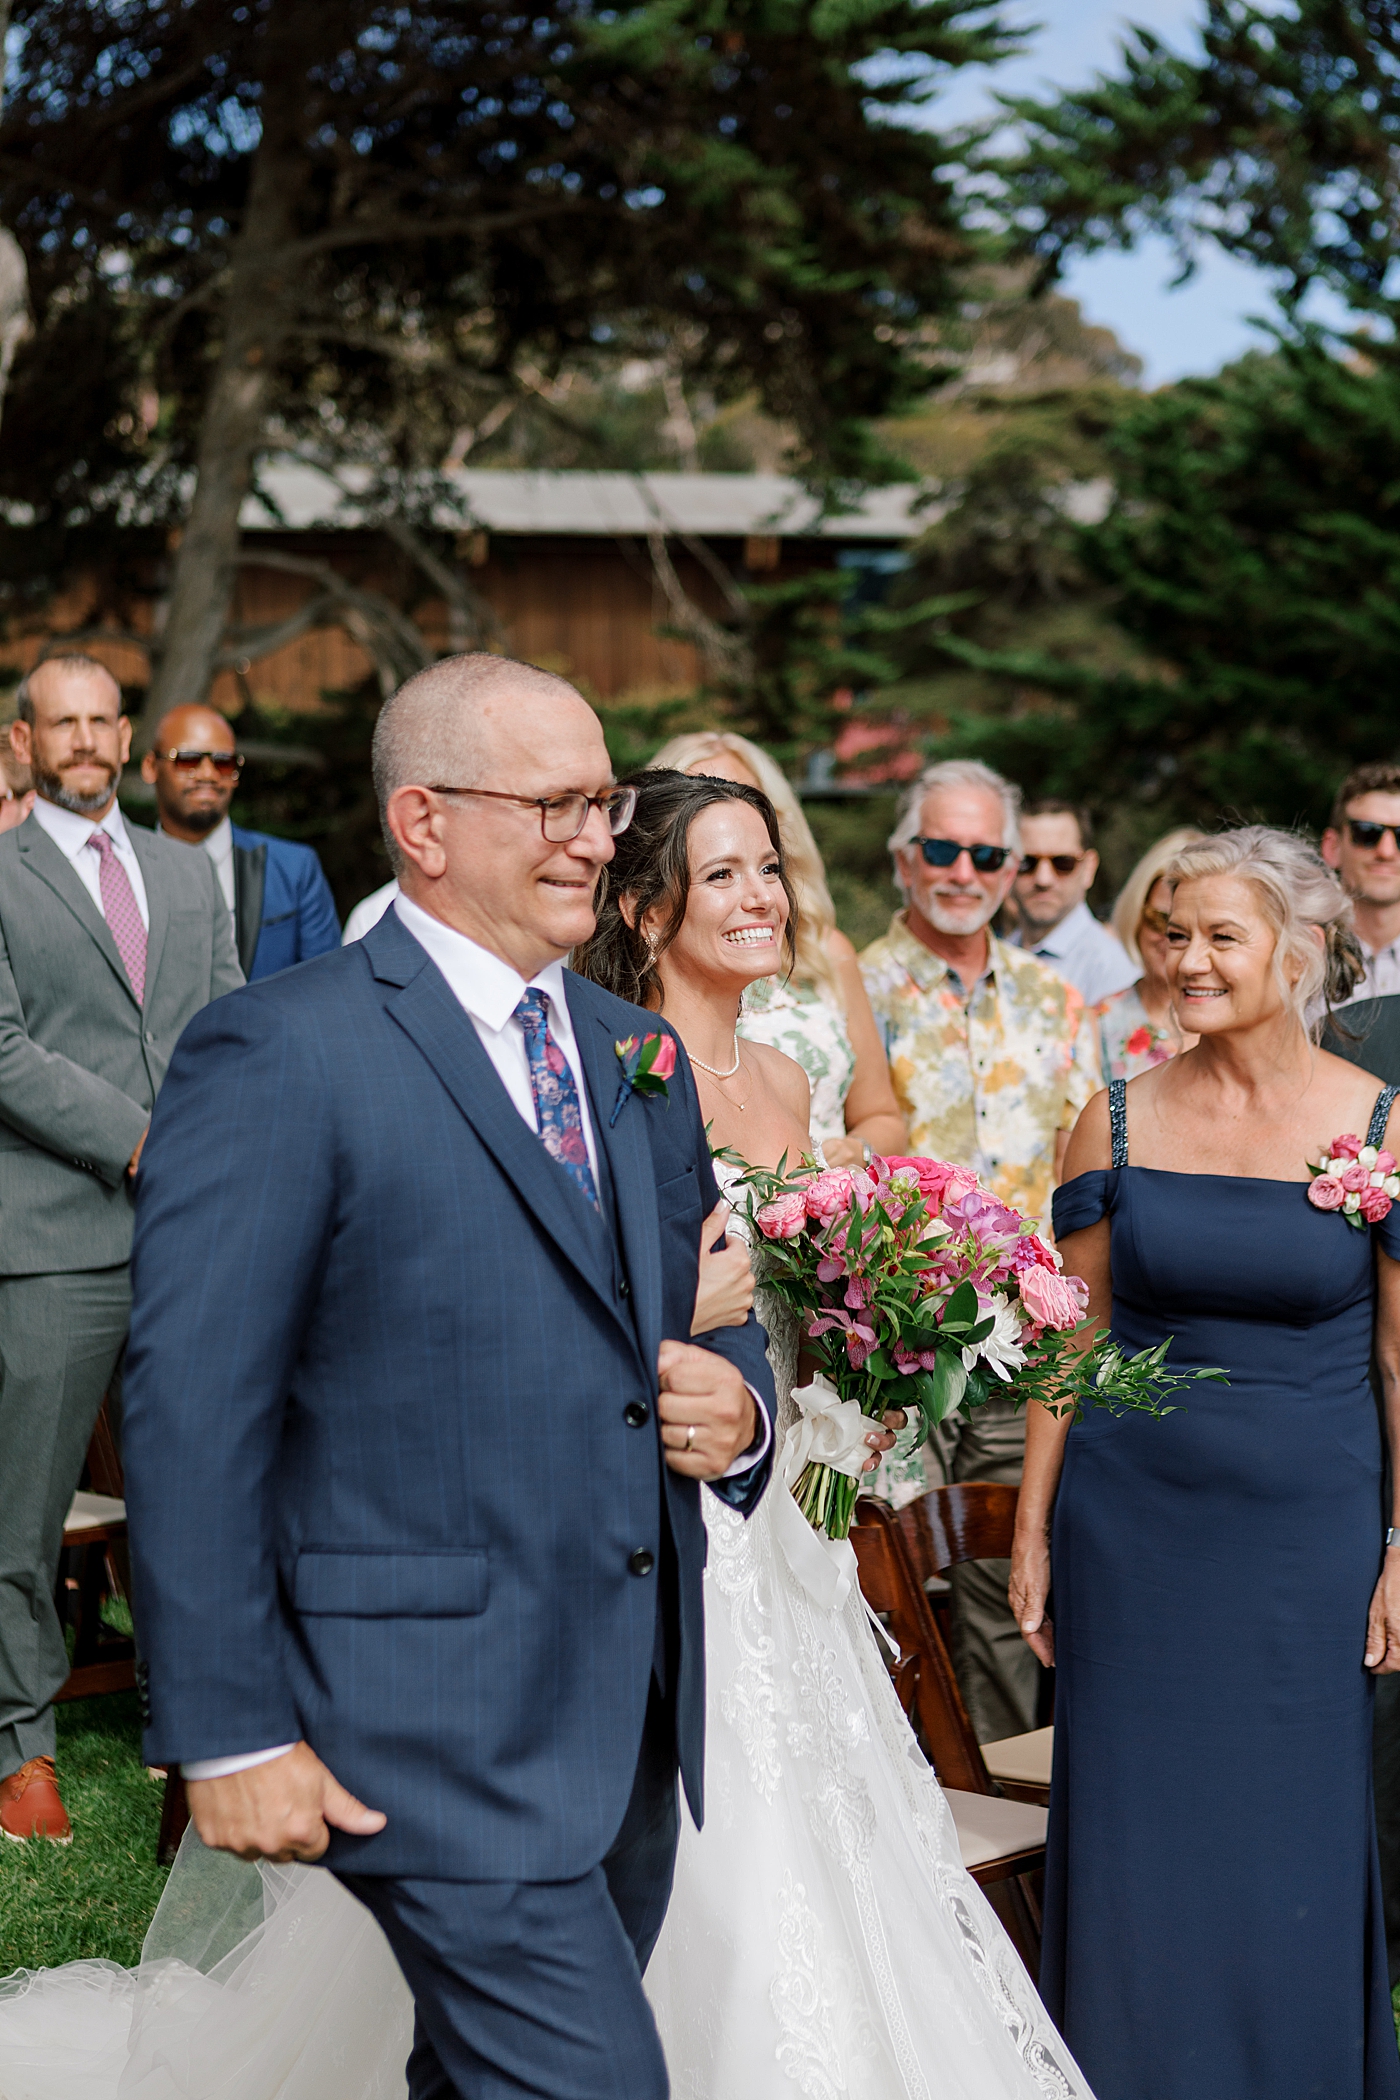 Image of father in navy suit walking the bride down the isle with a bright pink bouquet | Image by San Diego Wedding Photographer Hope Helmuth